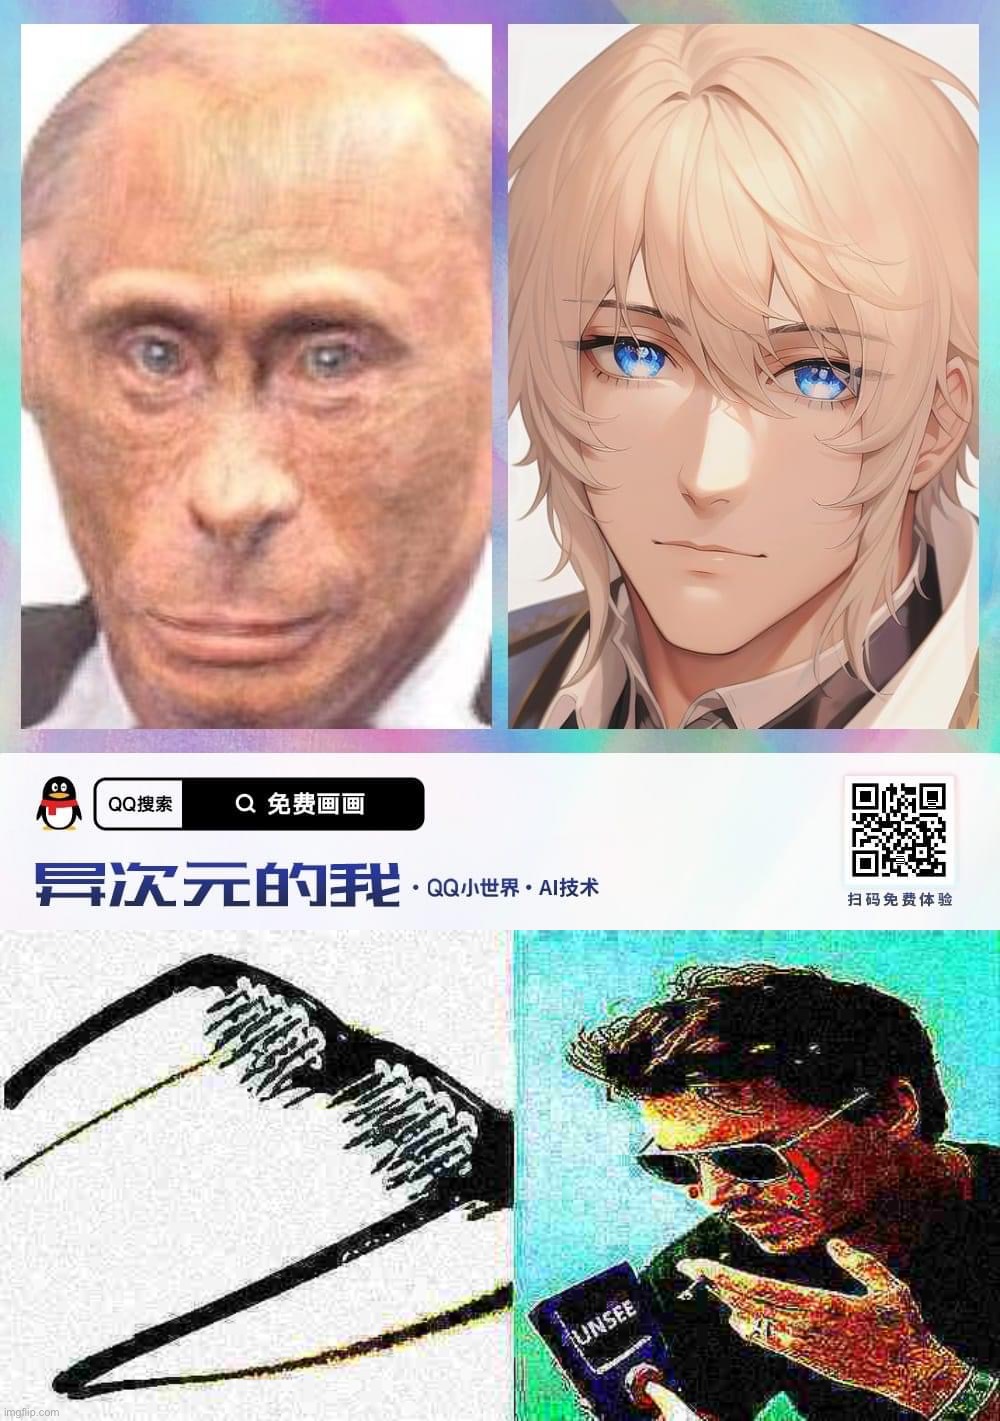 This is your brain on anime. Don’t do it, kids. Not even once | image tagged in vladimir putin banan man anime,unsee spike glasses deep-fried 3,banan man,anti-anime,anti,anime | made w/ Imgflip meme maker